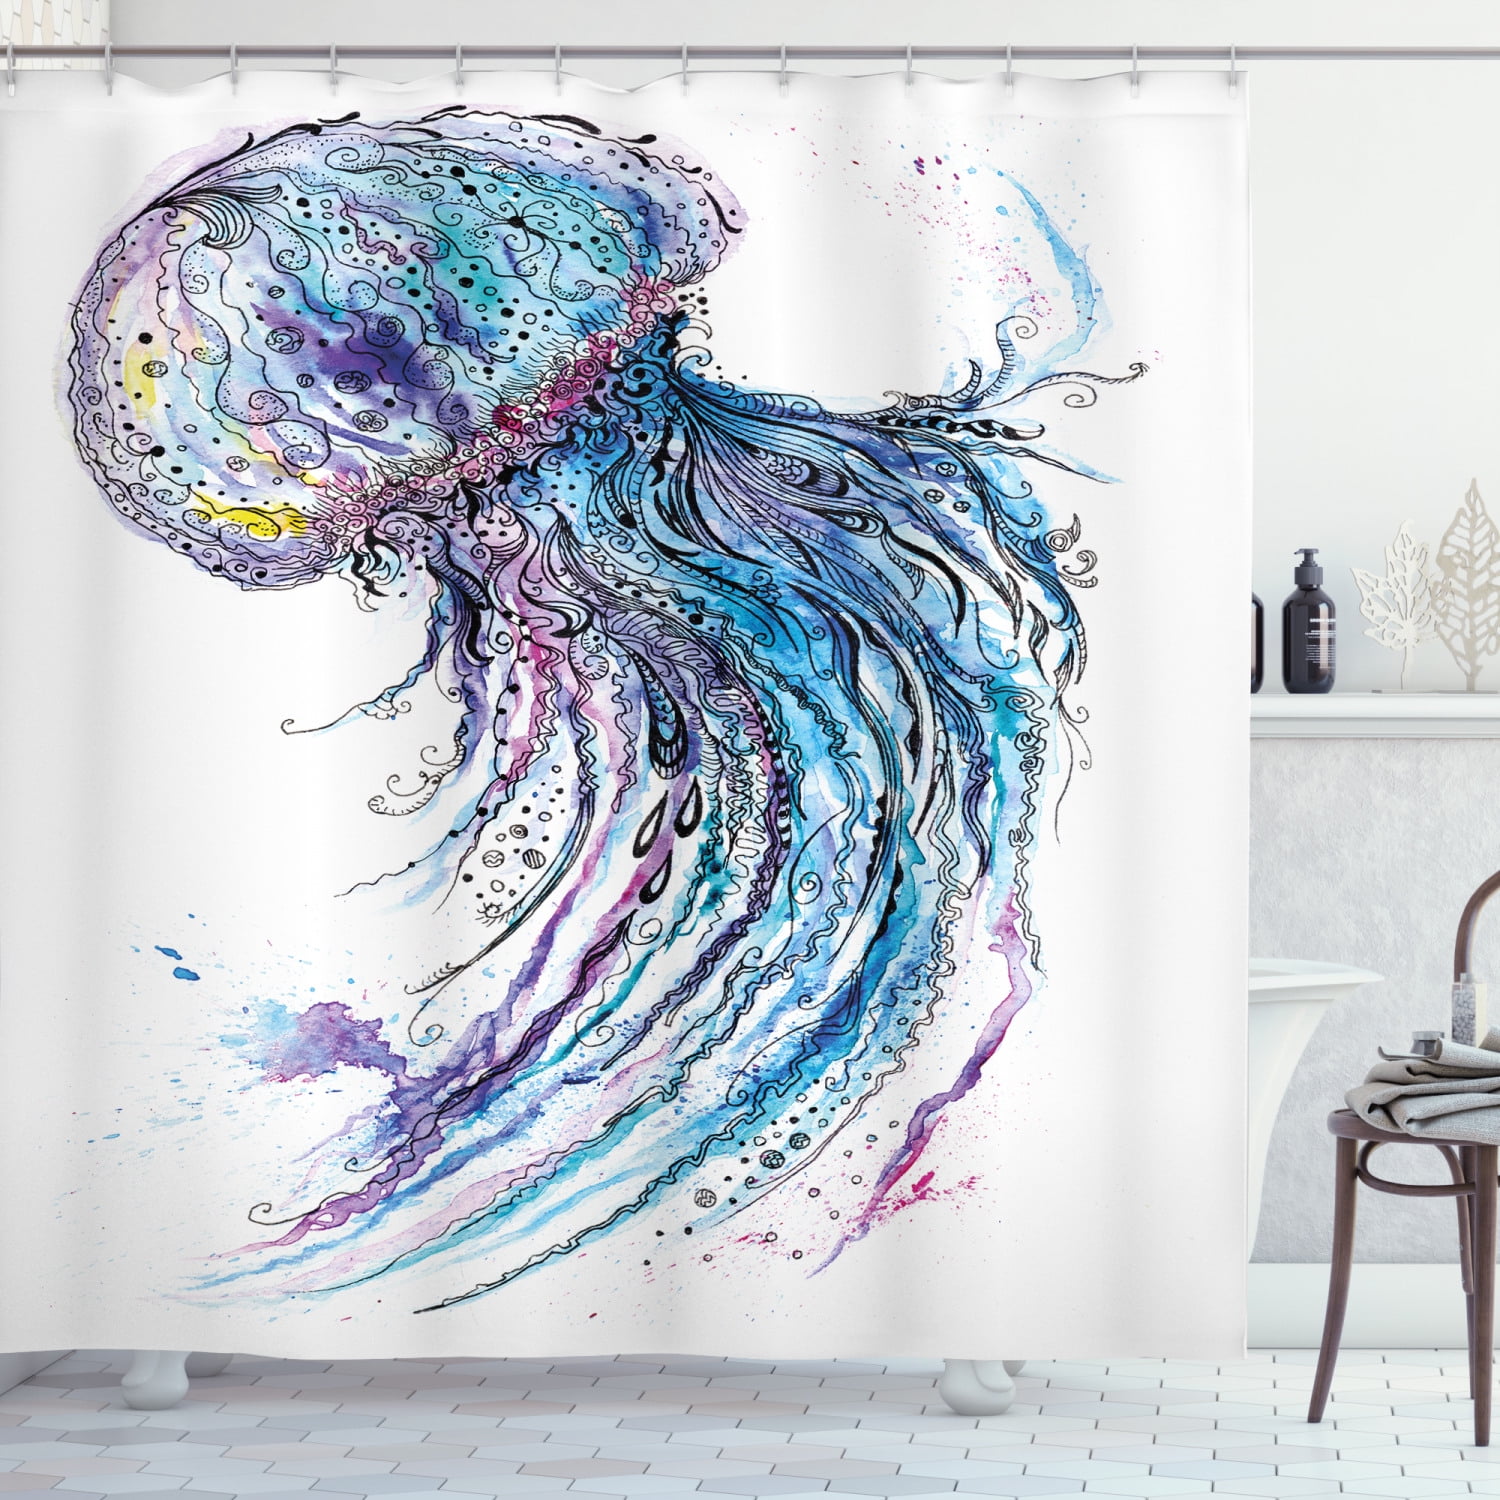 Hand painted jellyfish and aquatic plants Shower Curtain set Bathroom 71inch 